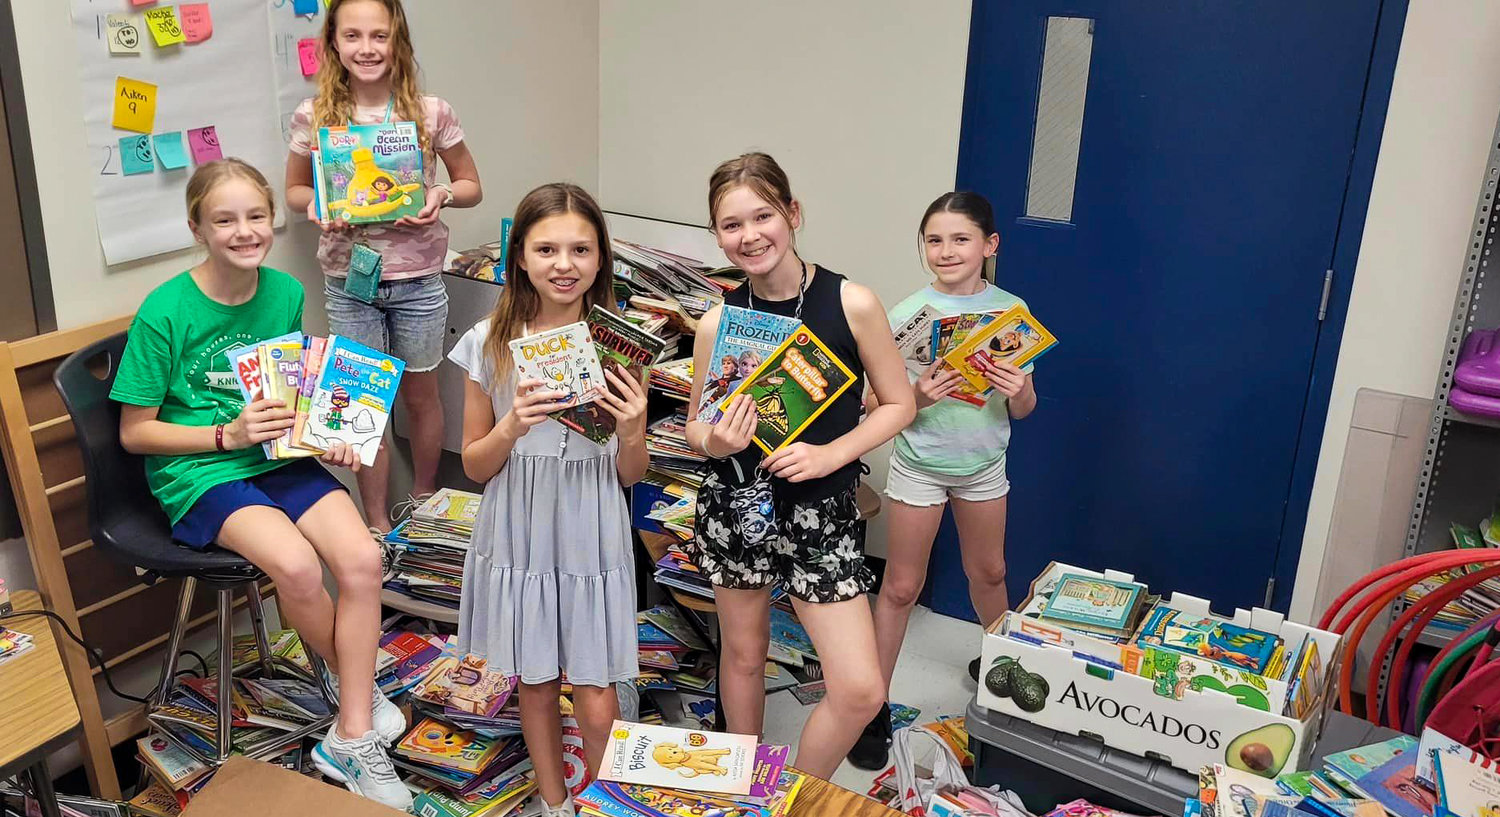 Nottingham Country Elementary School students and families recently donated over 1,700 books to Books Between Kids, which serves Houston’s at-risk children by providing them with books to build their own home libraries.